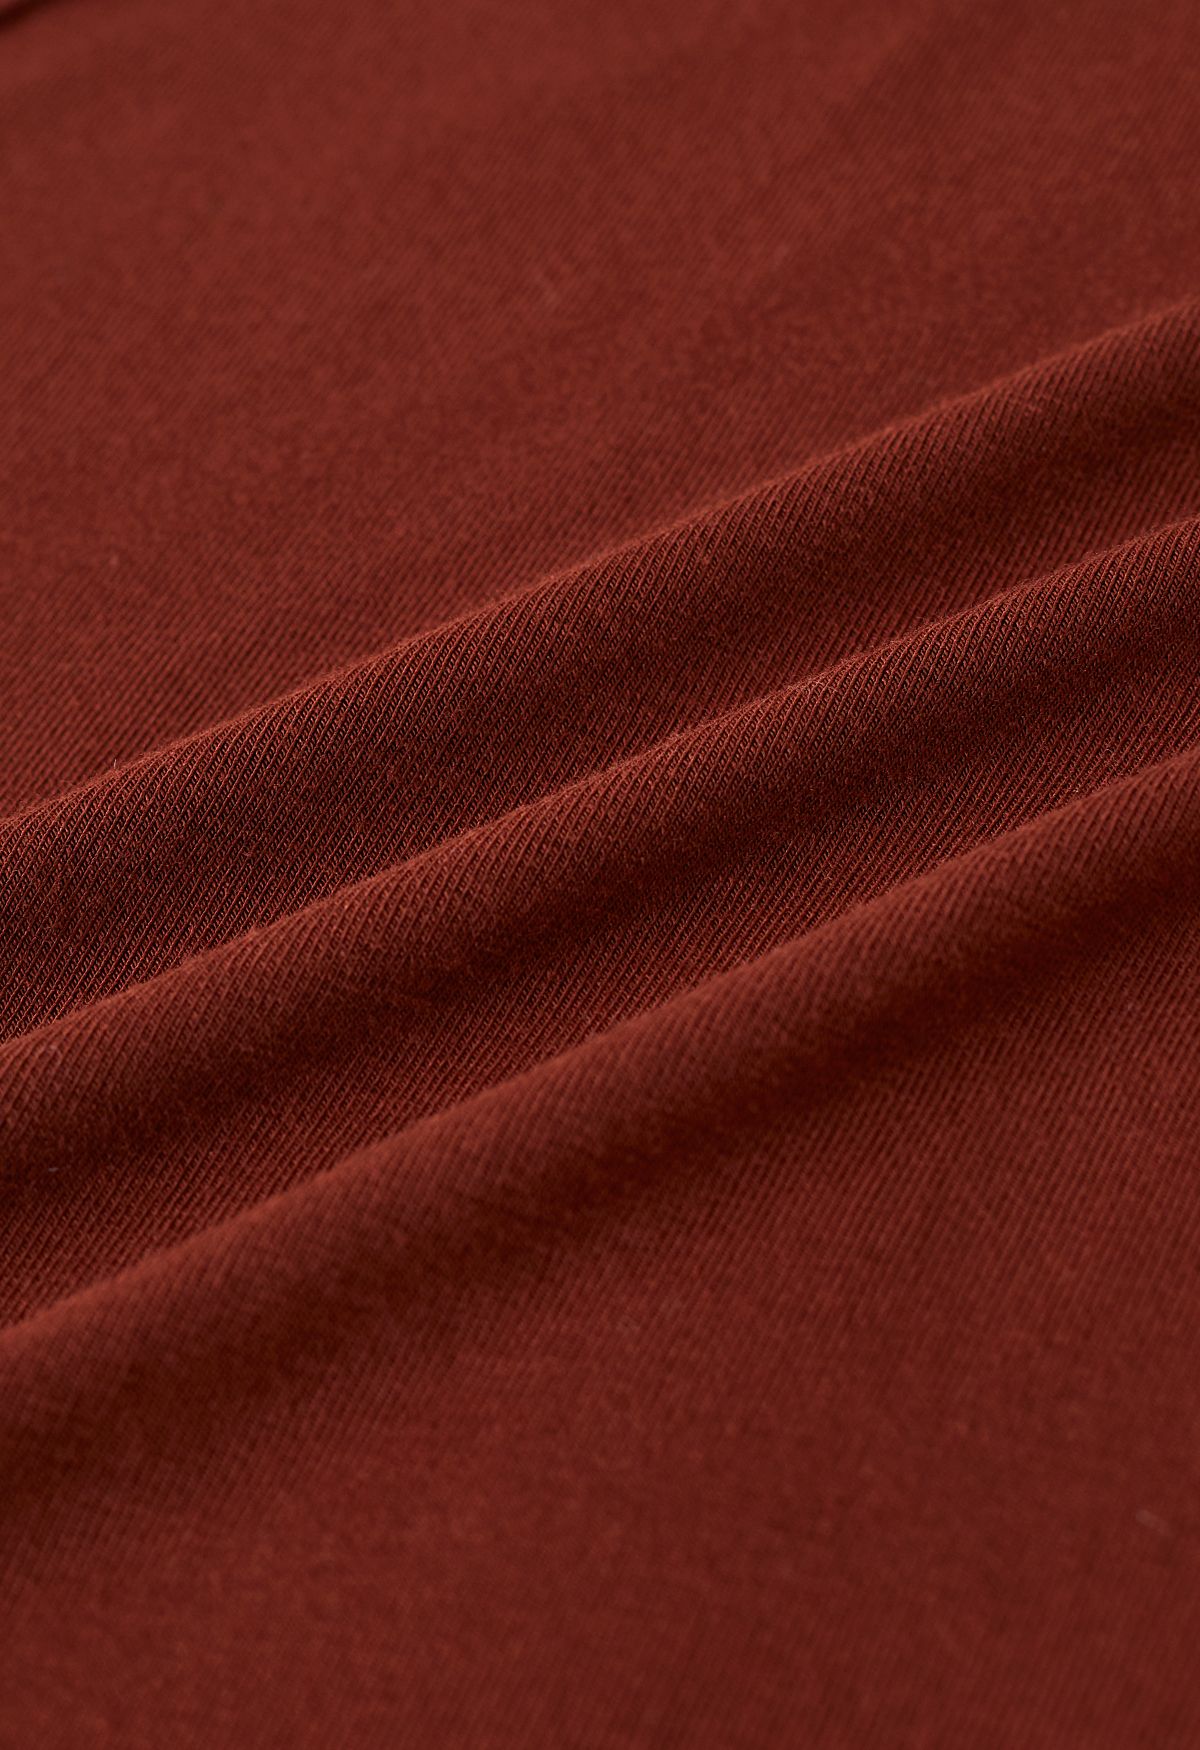 Embossed Seam Detail High Neck Knit Top in Rust Red